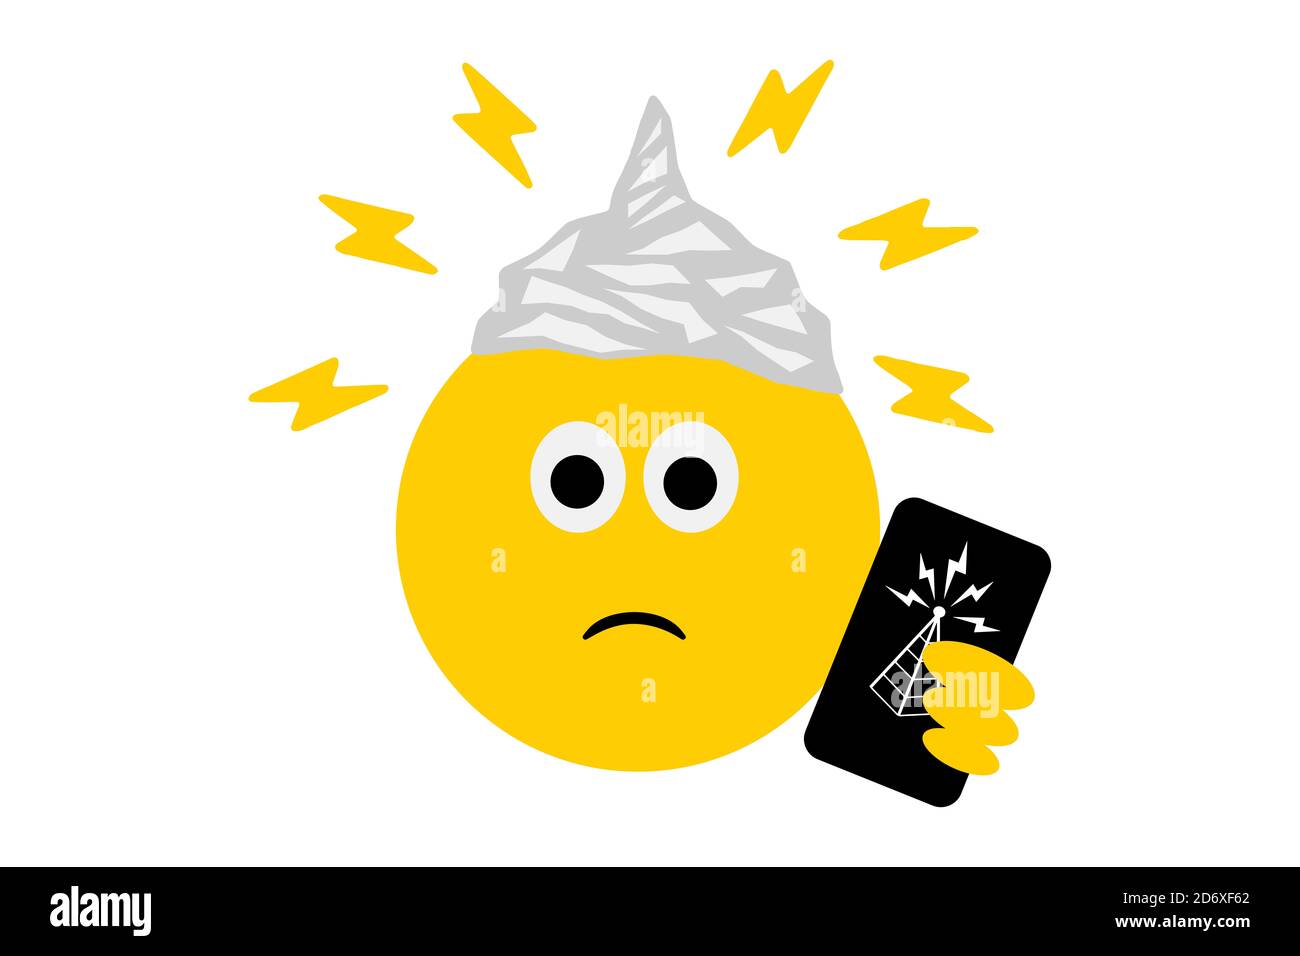 Emoji wearing tin foil hat, carrying phone with radio tower icon, conspiracy theory,  QAnon, G5, flat earth, cults concept illustration Stock Photo